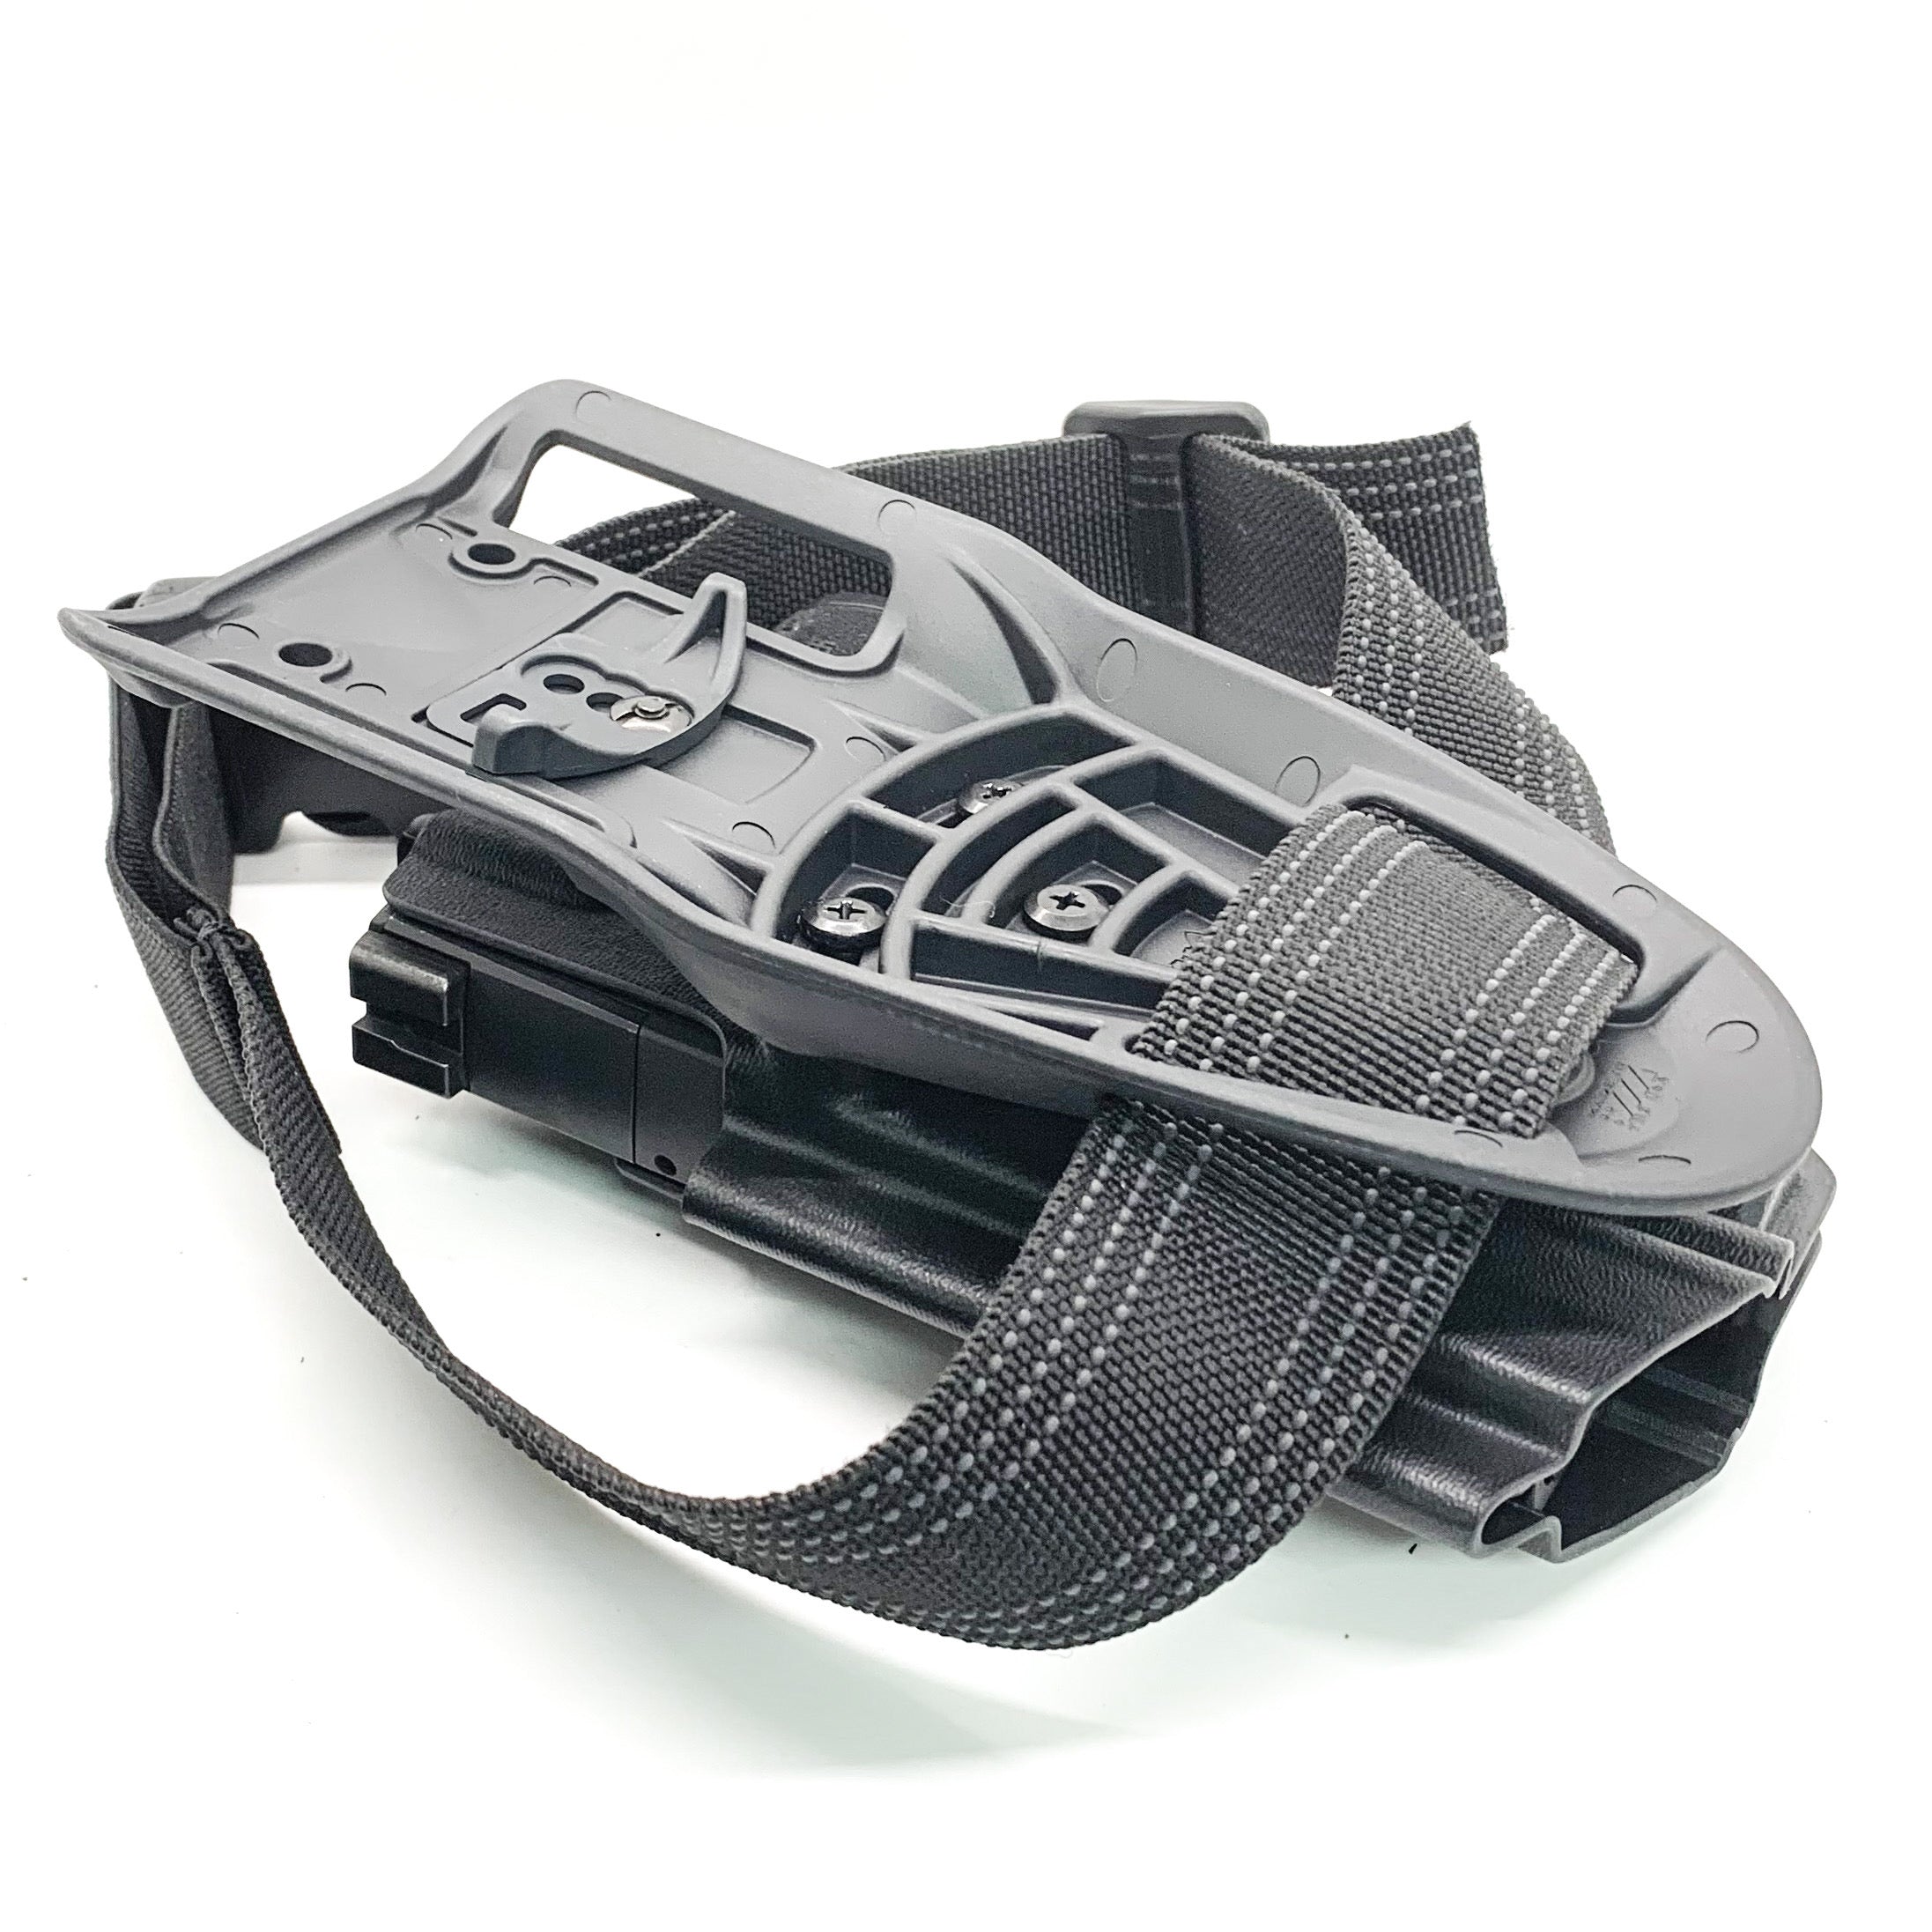 For the best Outside Waistband Duty & Competition Kydex Holster designed for the Sig Sauer P365-XMACRO with Streamlight TLR-8, shop Four Brothers Holsters.  Full sweat guard, adjustable retention, minimal material & smooth edges to reduce printing, open muzzle, cleared for red dot sights. Made in the USA. 